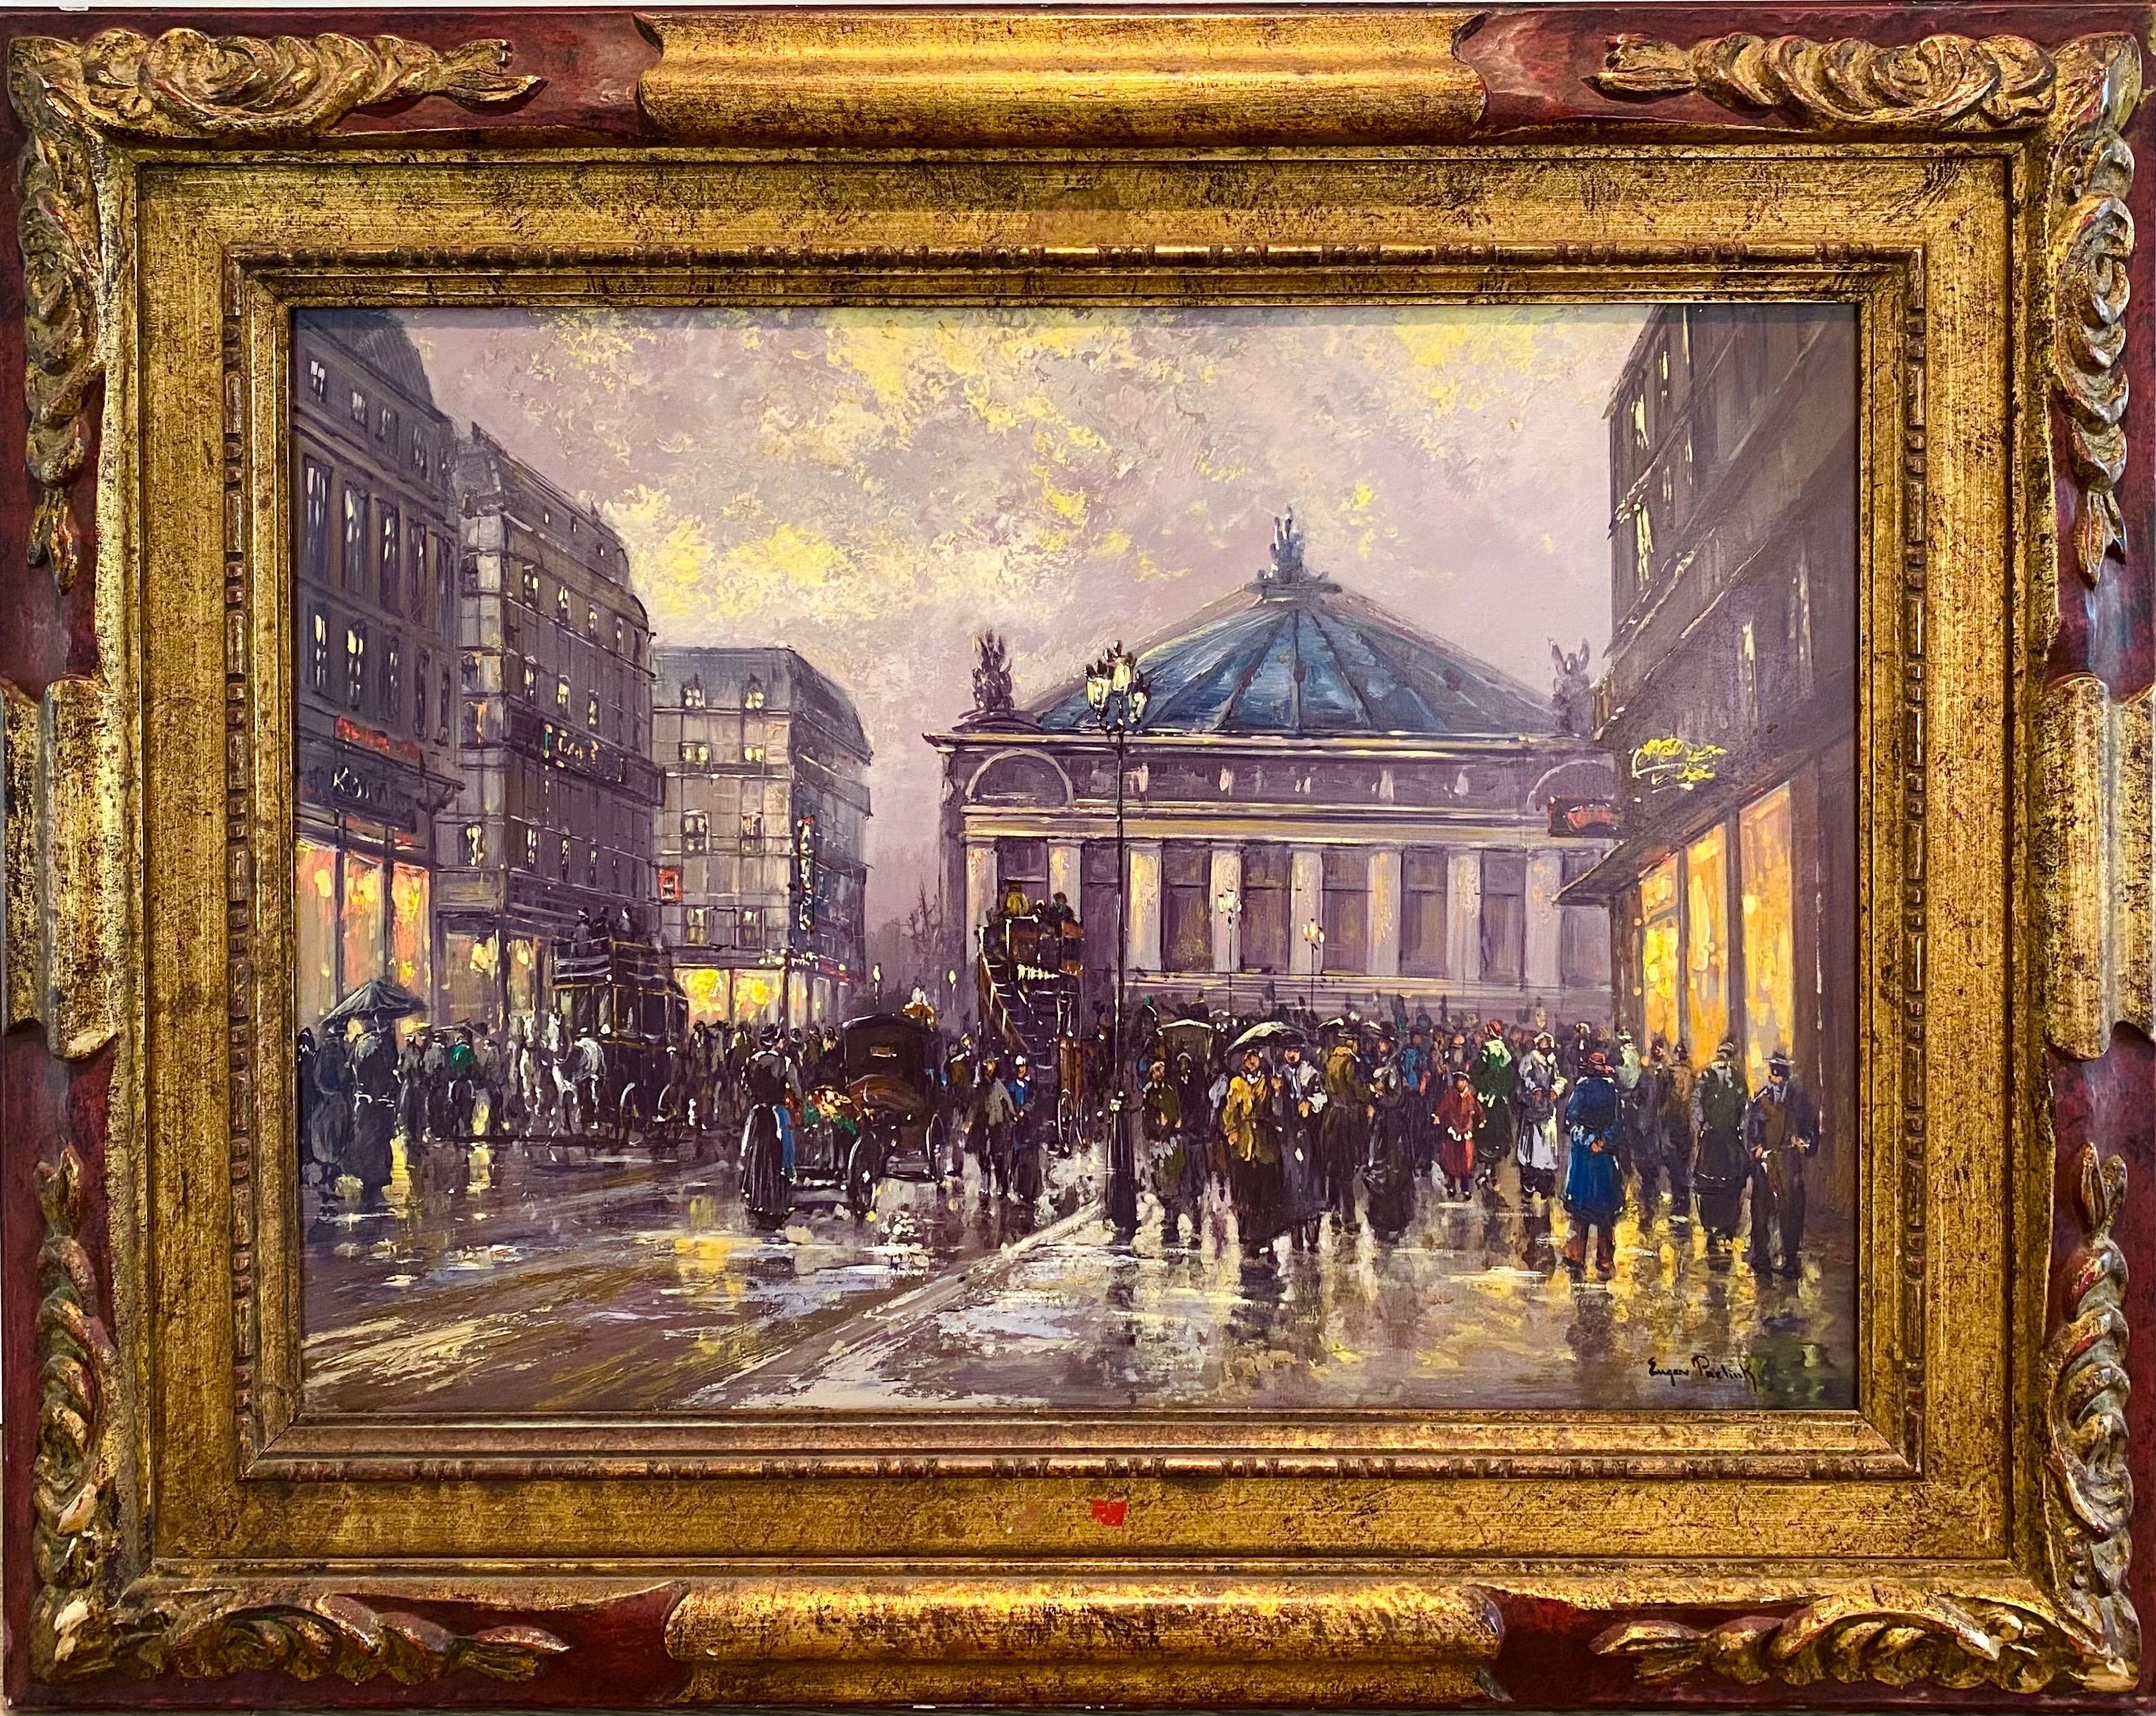 Unknown Figurative Painting - Large 19th century style French impressionist cityscape - L' opera de Paris